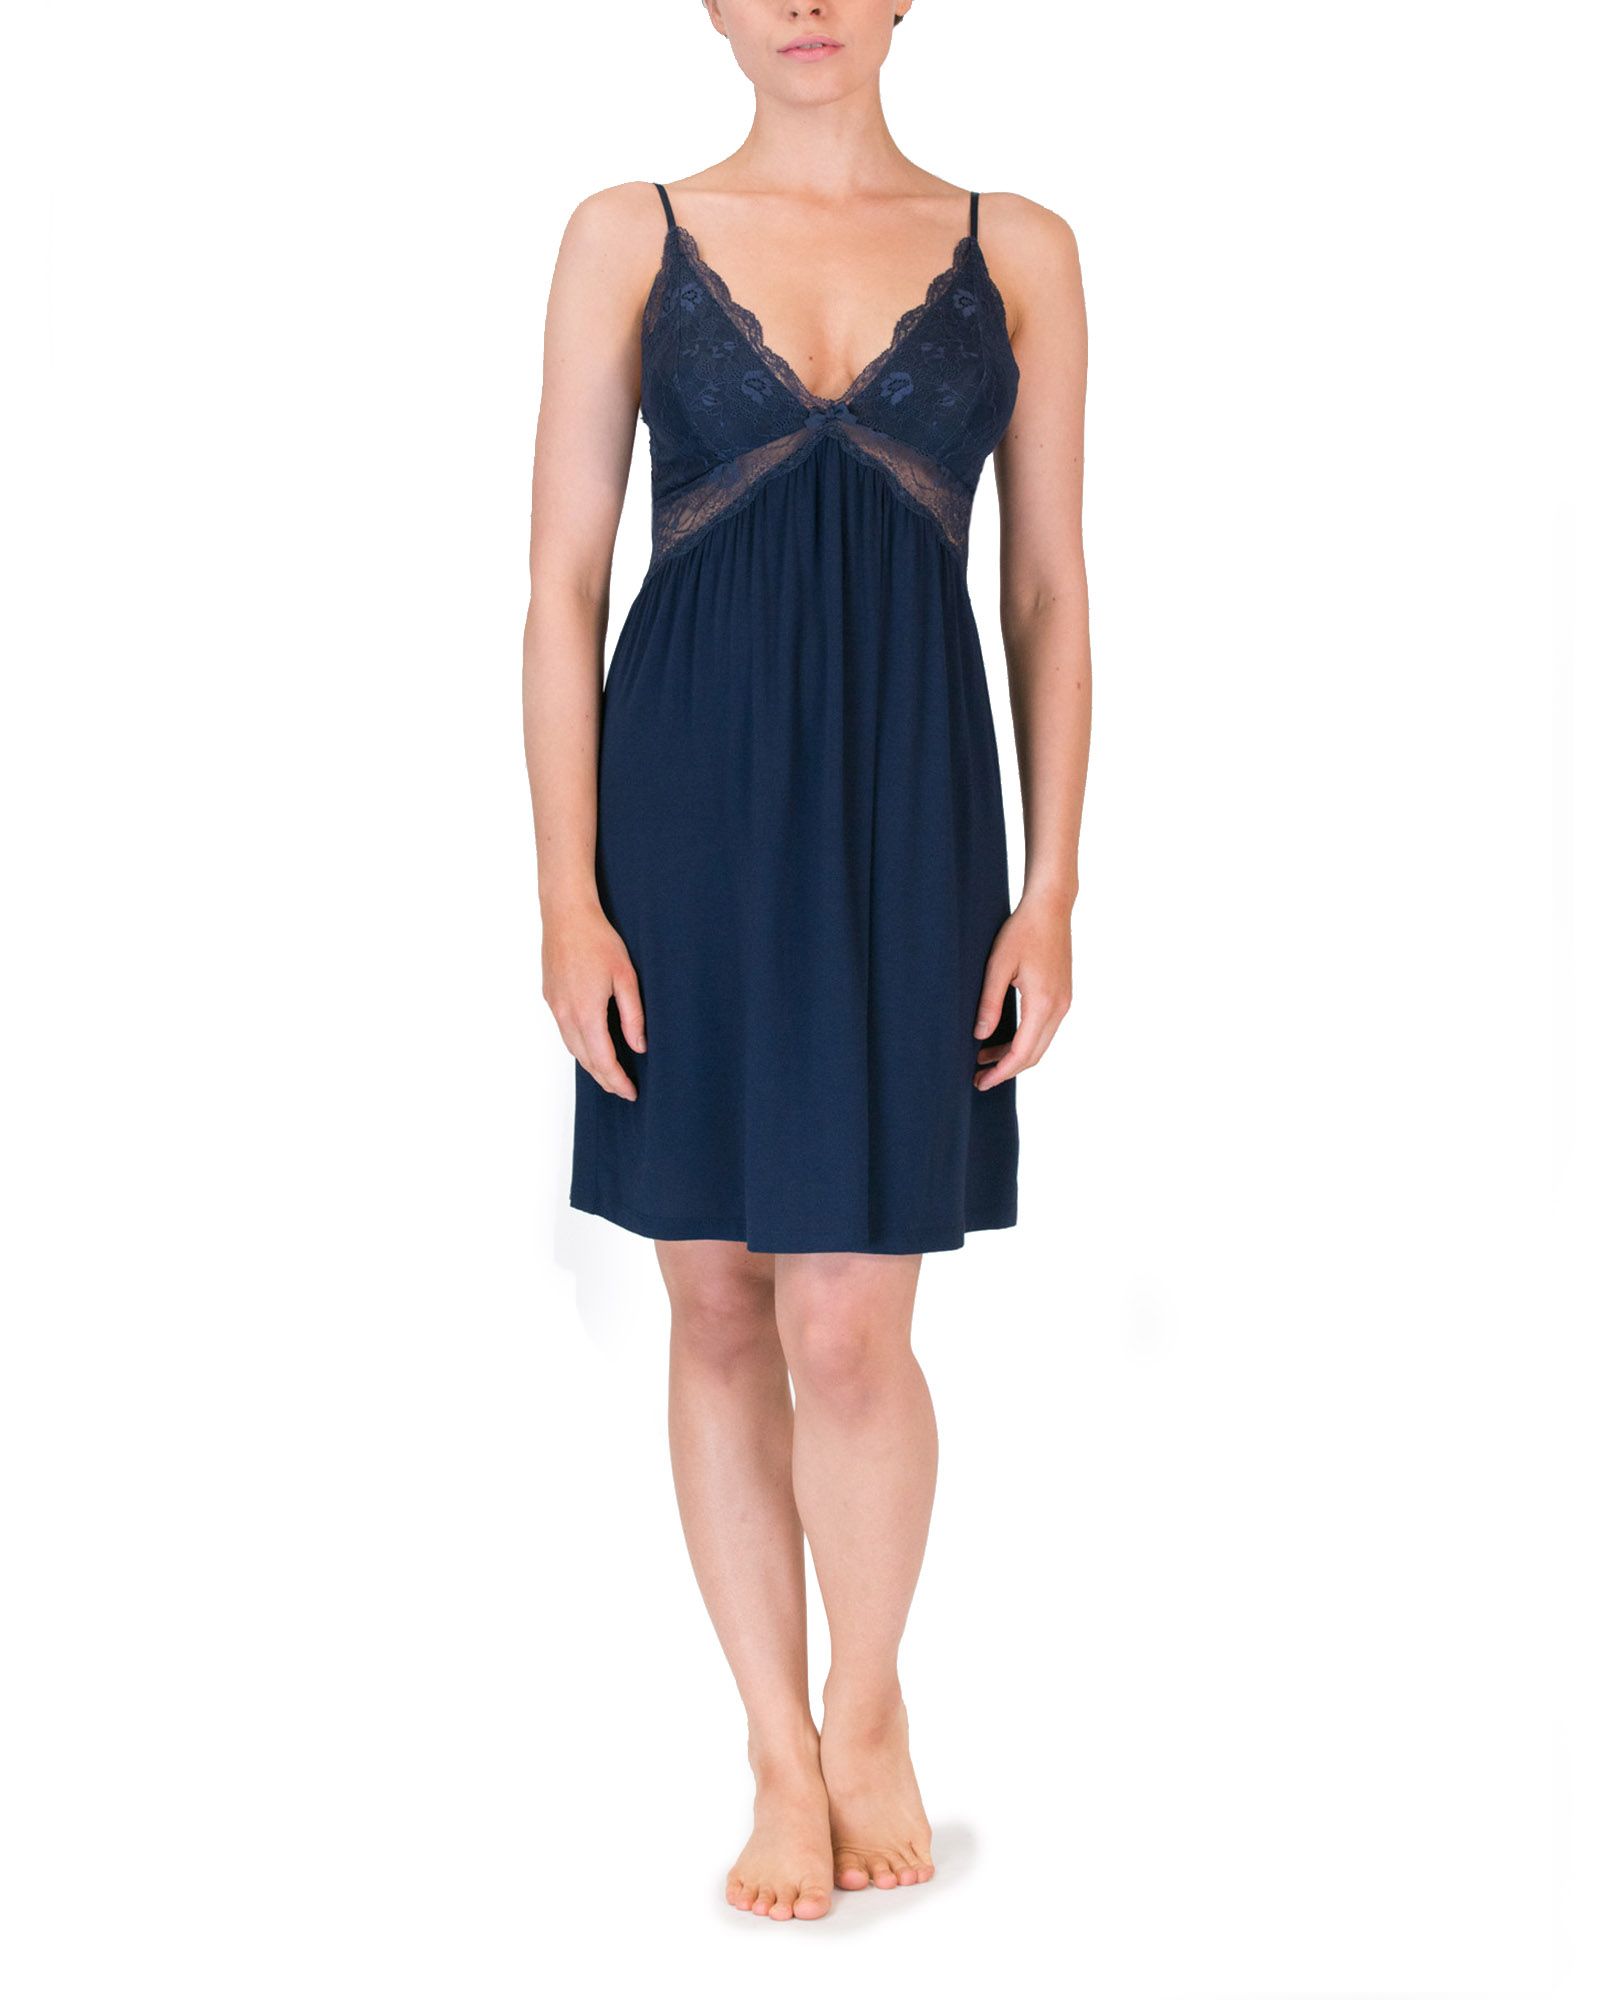 Love & Lustre Butterfly Short Nightdress LL658 - Nighties Deep Blue / 14 / L  Available at Illusions Lingerie